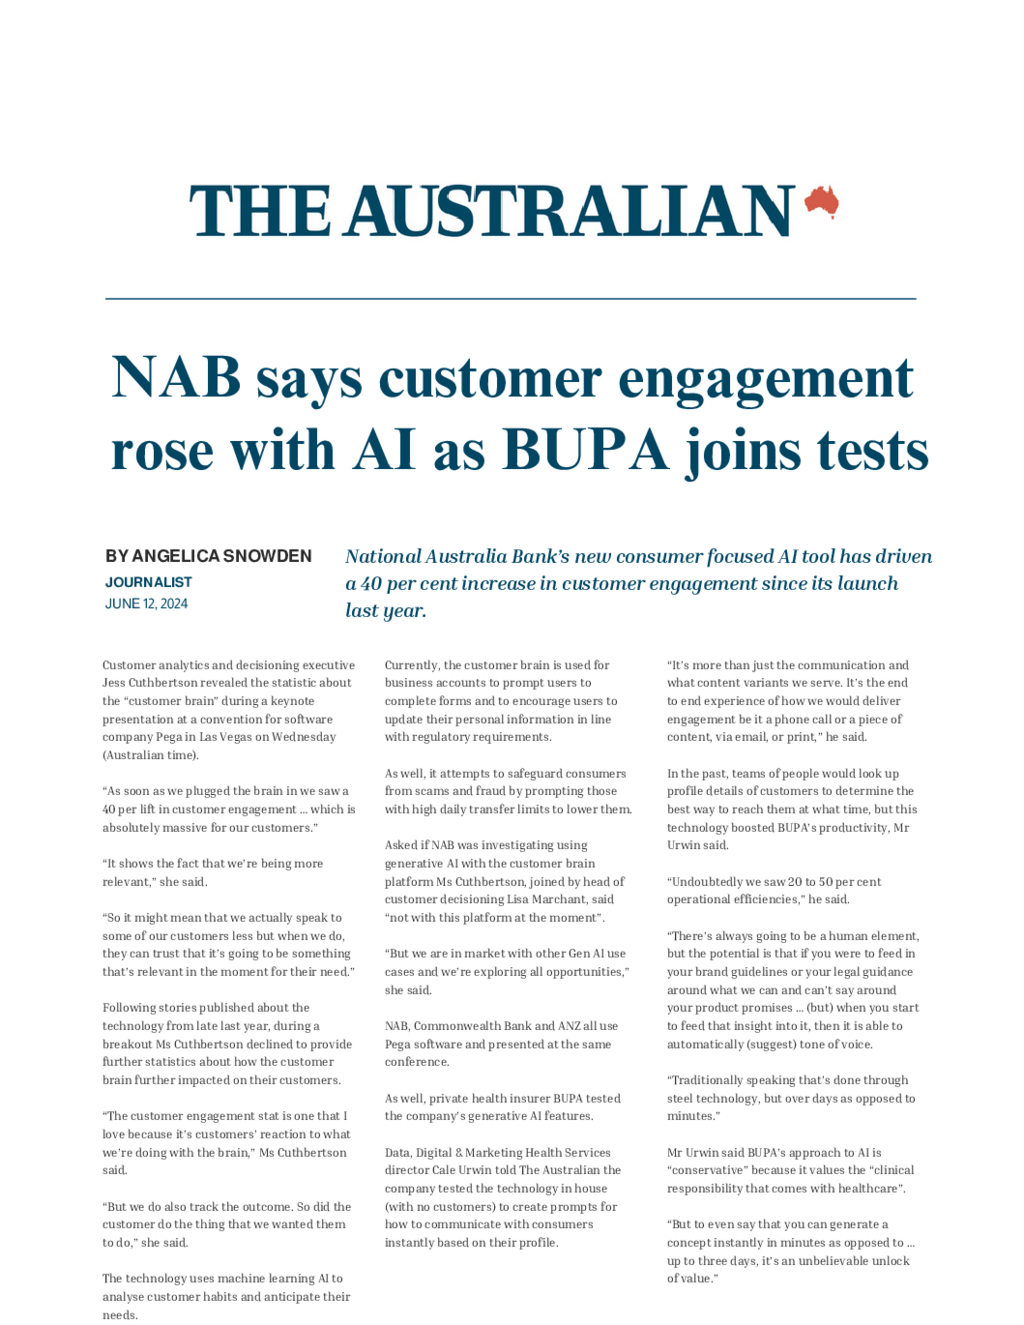 The Australian: NAB says customer engagement rose with AI as BUPA joins tests